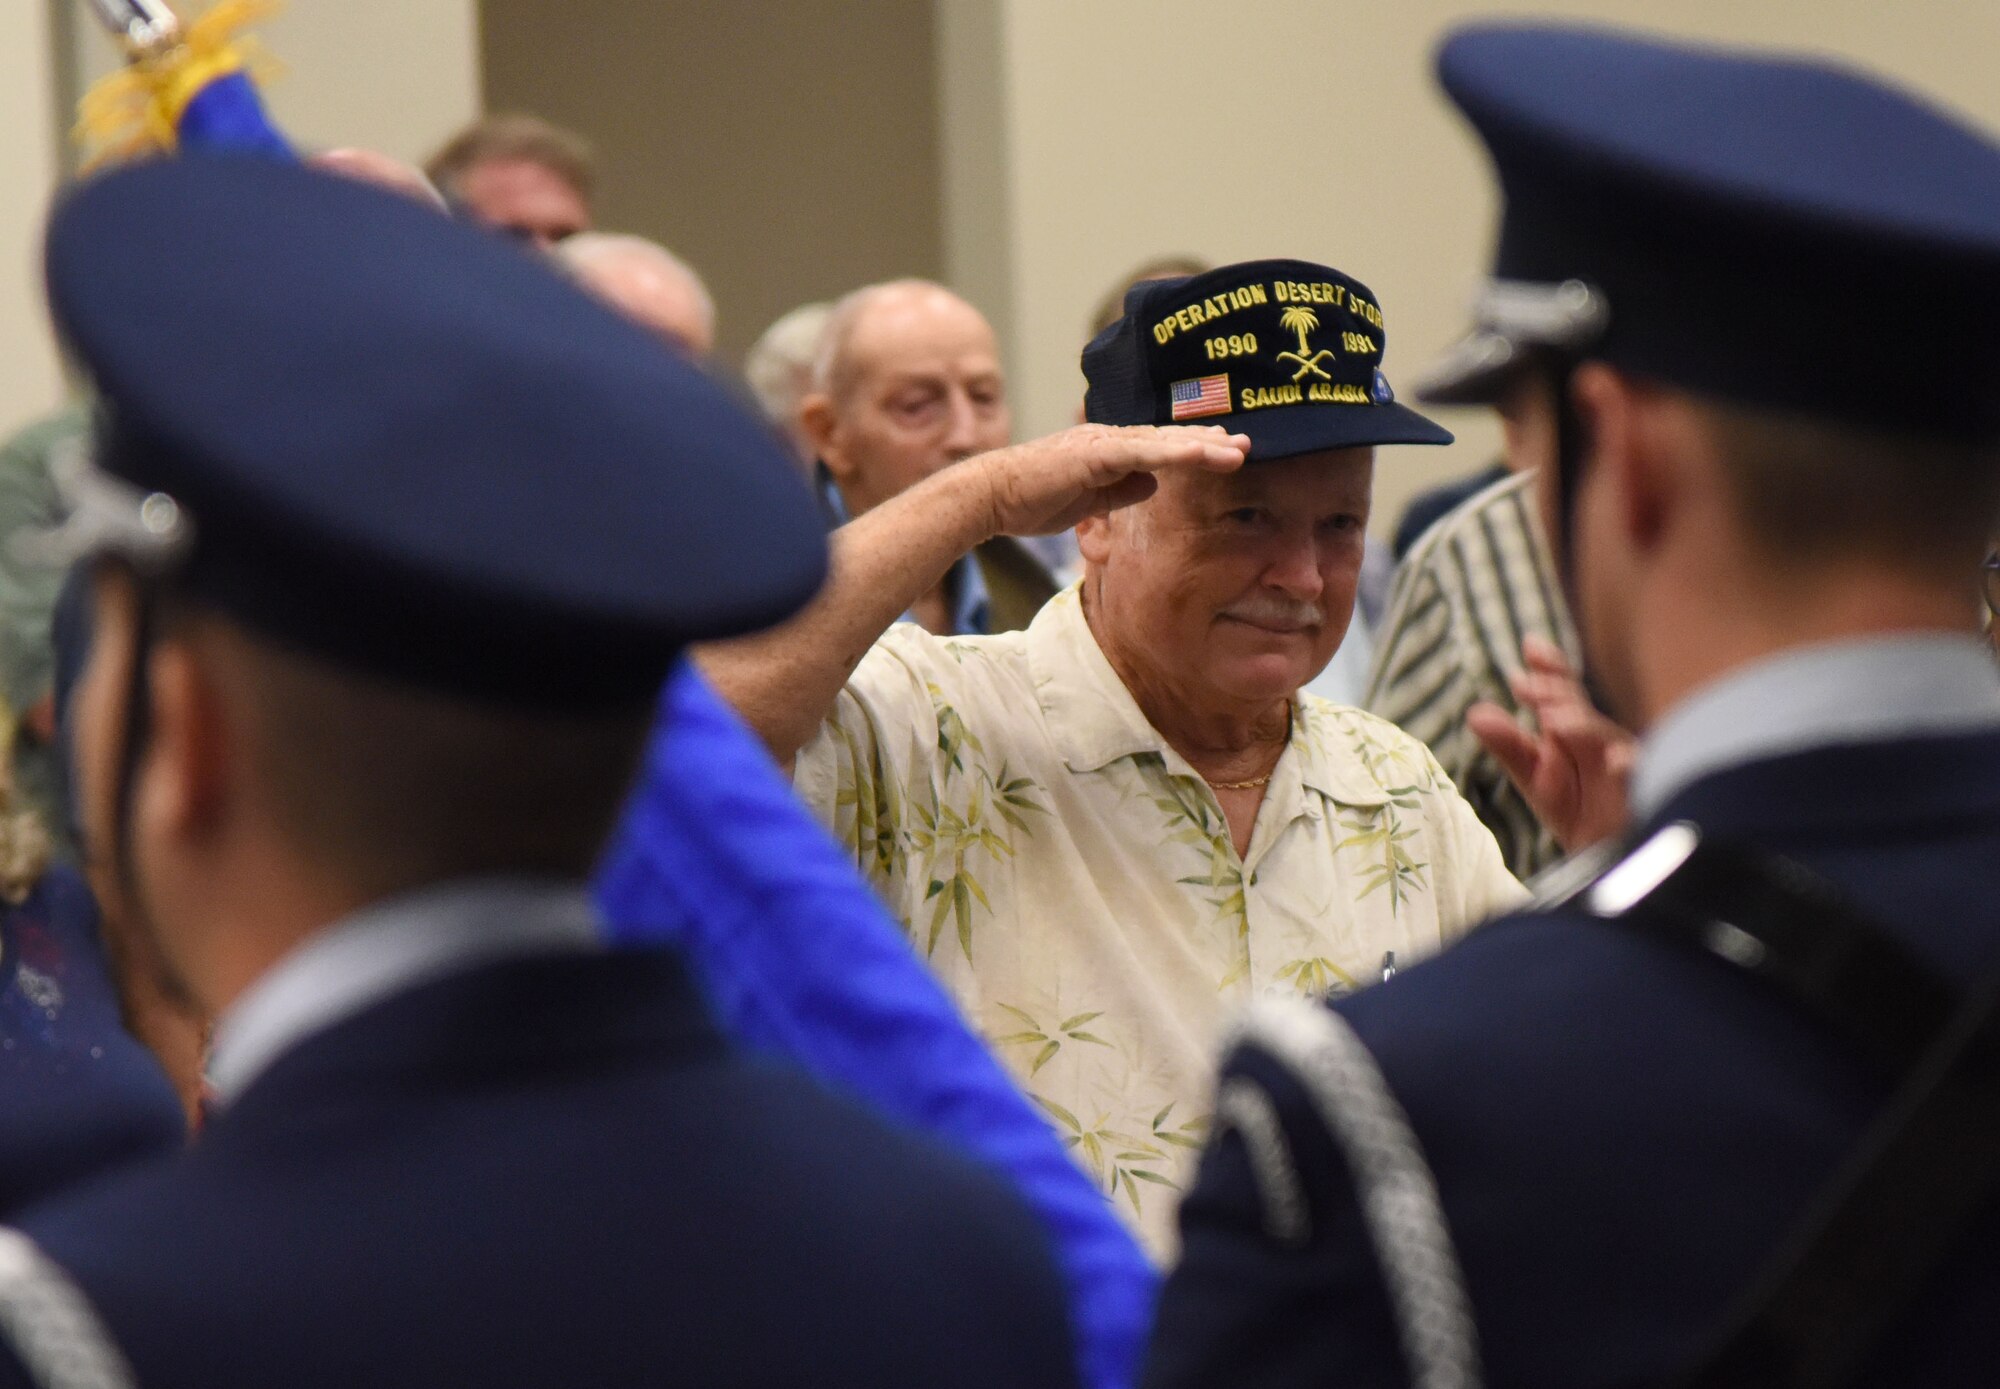 U.S. Army retired Sgt. 1st Class Tom Carpenter renders a salute during the singing of the national anthem during Retiree Appreciation Day at the Roberts Consolidated Aircraft Maintenance Facility Oct. 20, 2017, on Keesler Air Force Base, Mississippi. The annual event, sponsored by the Keesler Retiree Activities Office, included more than 20 displays with information pertinent to retirees and a free lunch. (U.S. Air Force photo by Kemberly Groue)